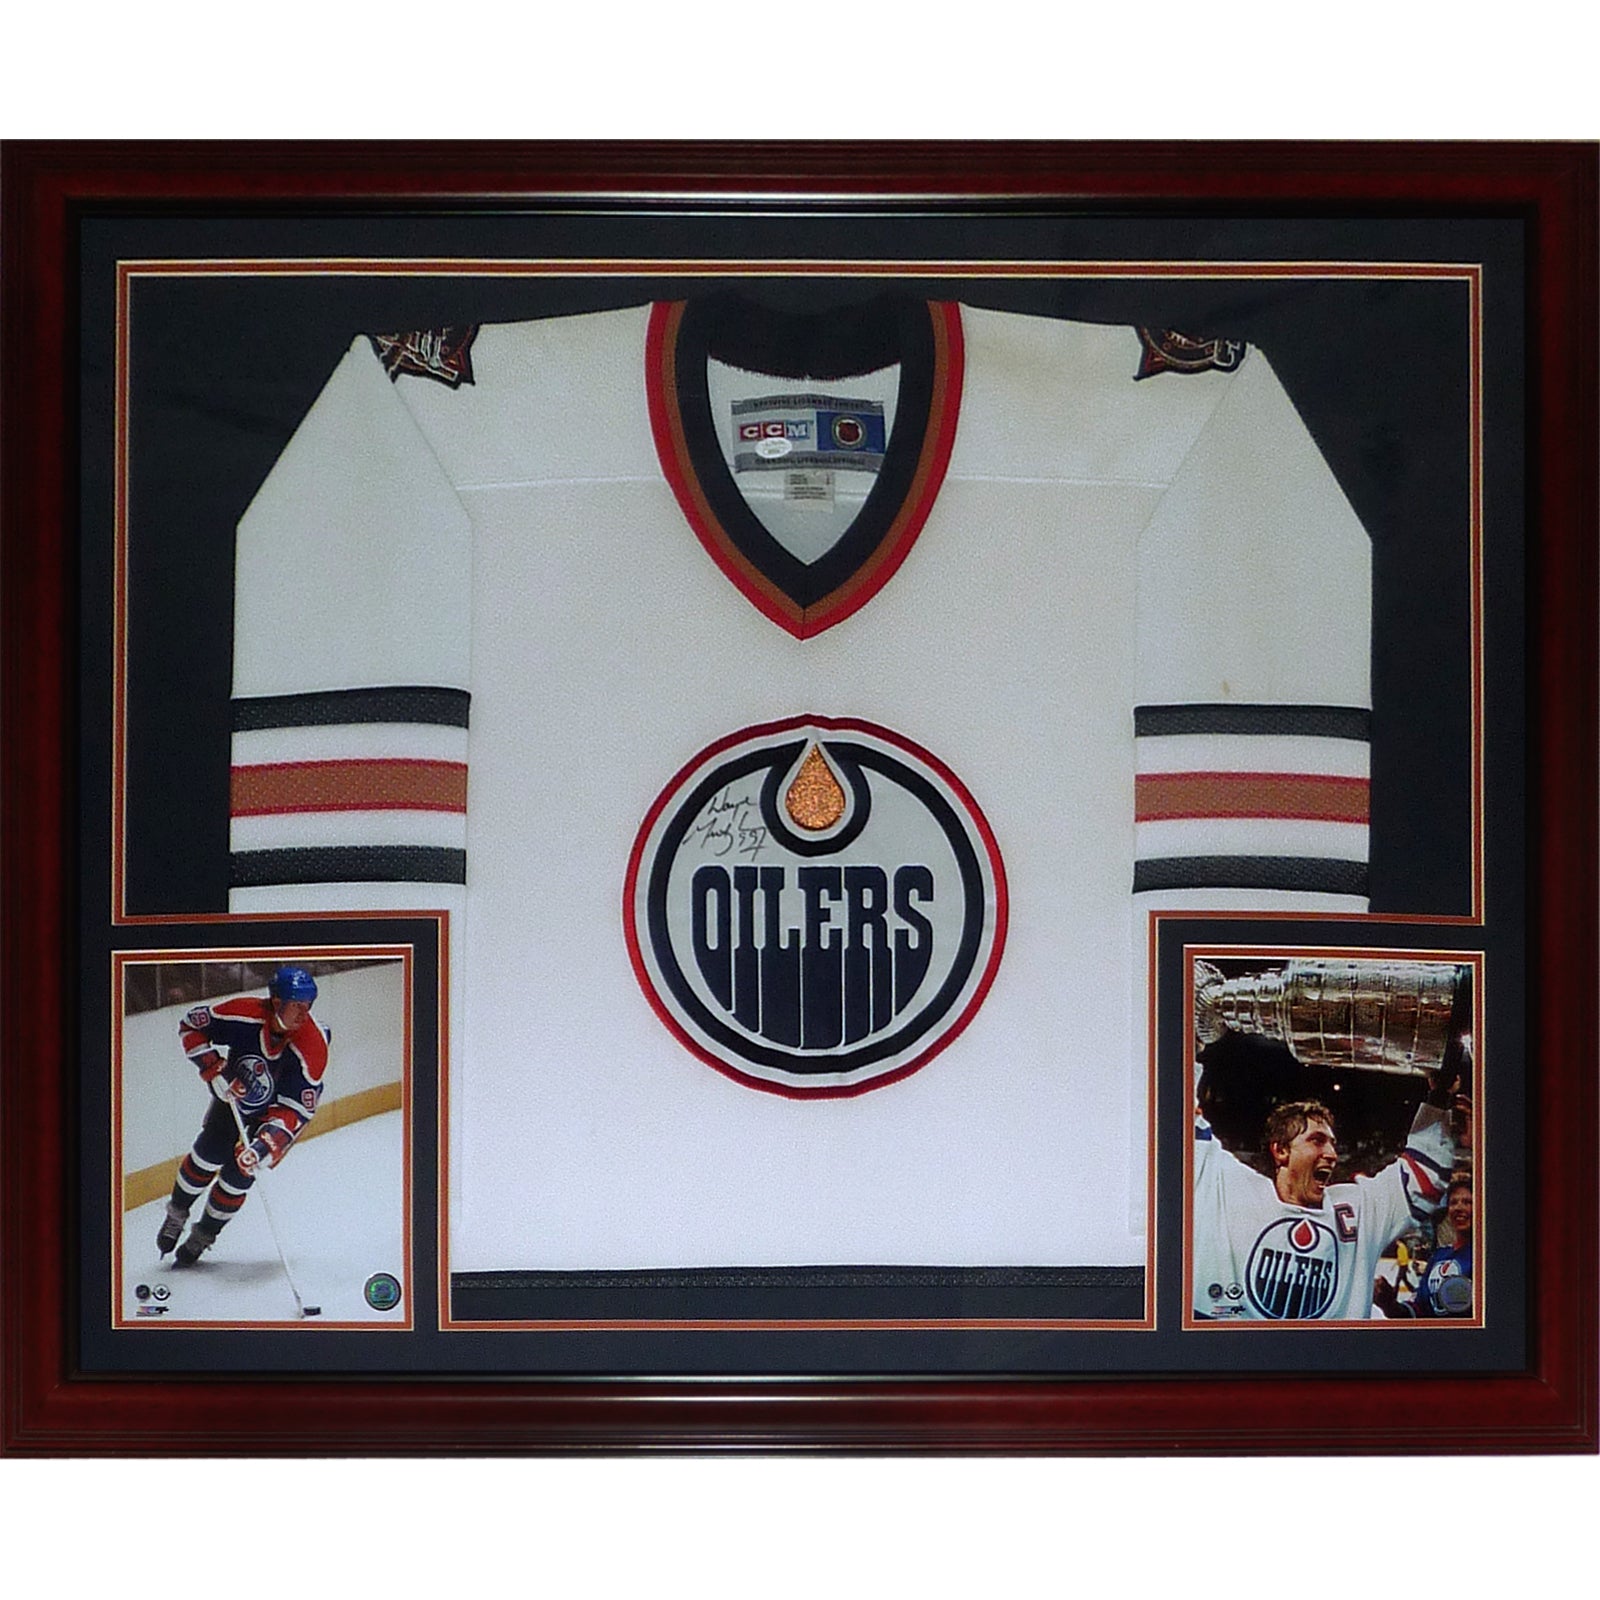 Gretzky Oilers Jersey 